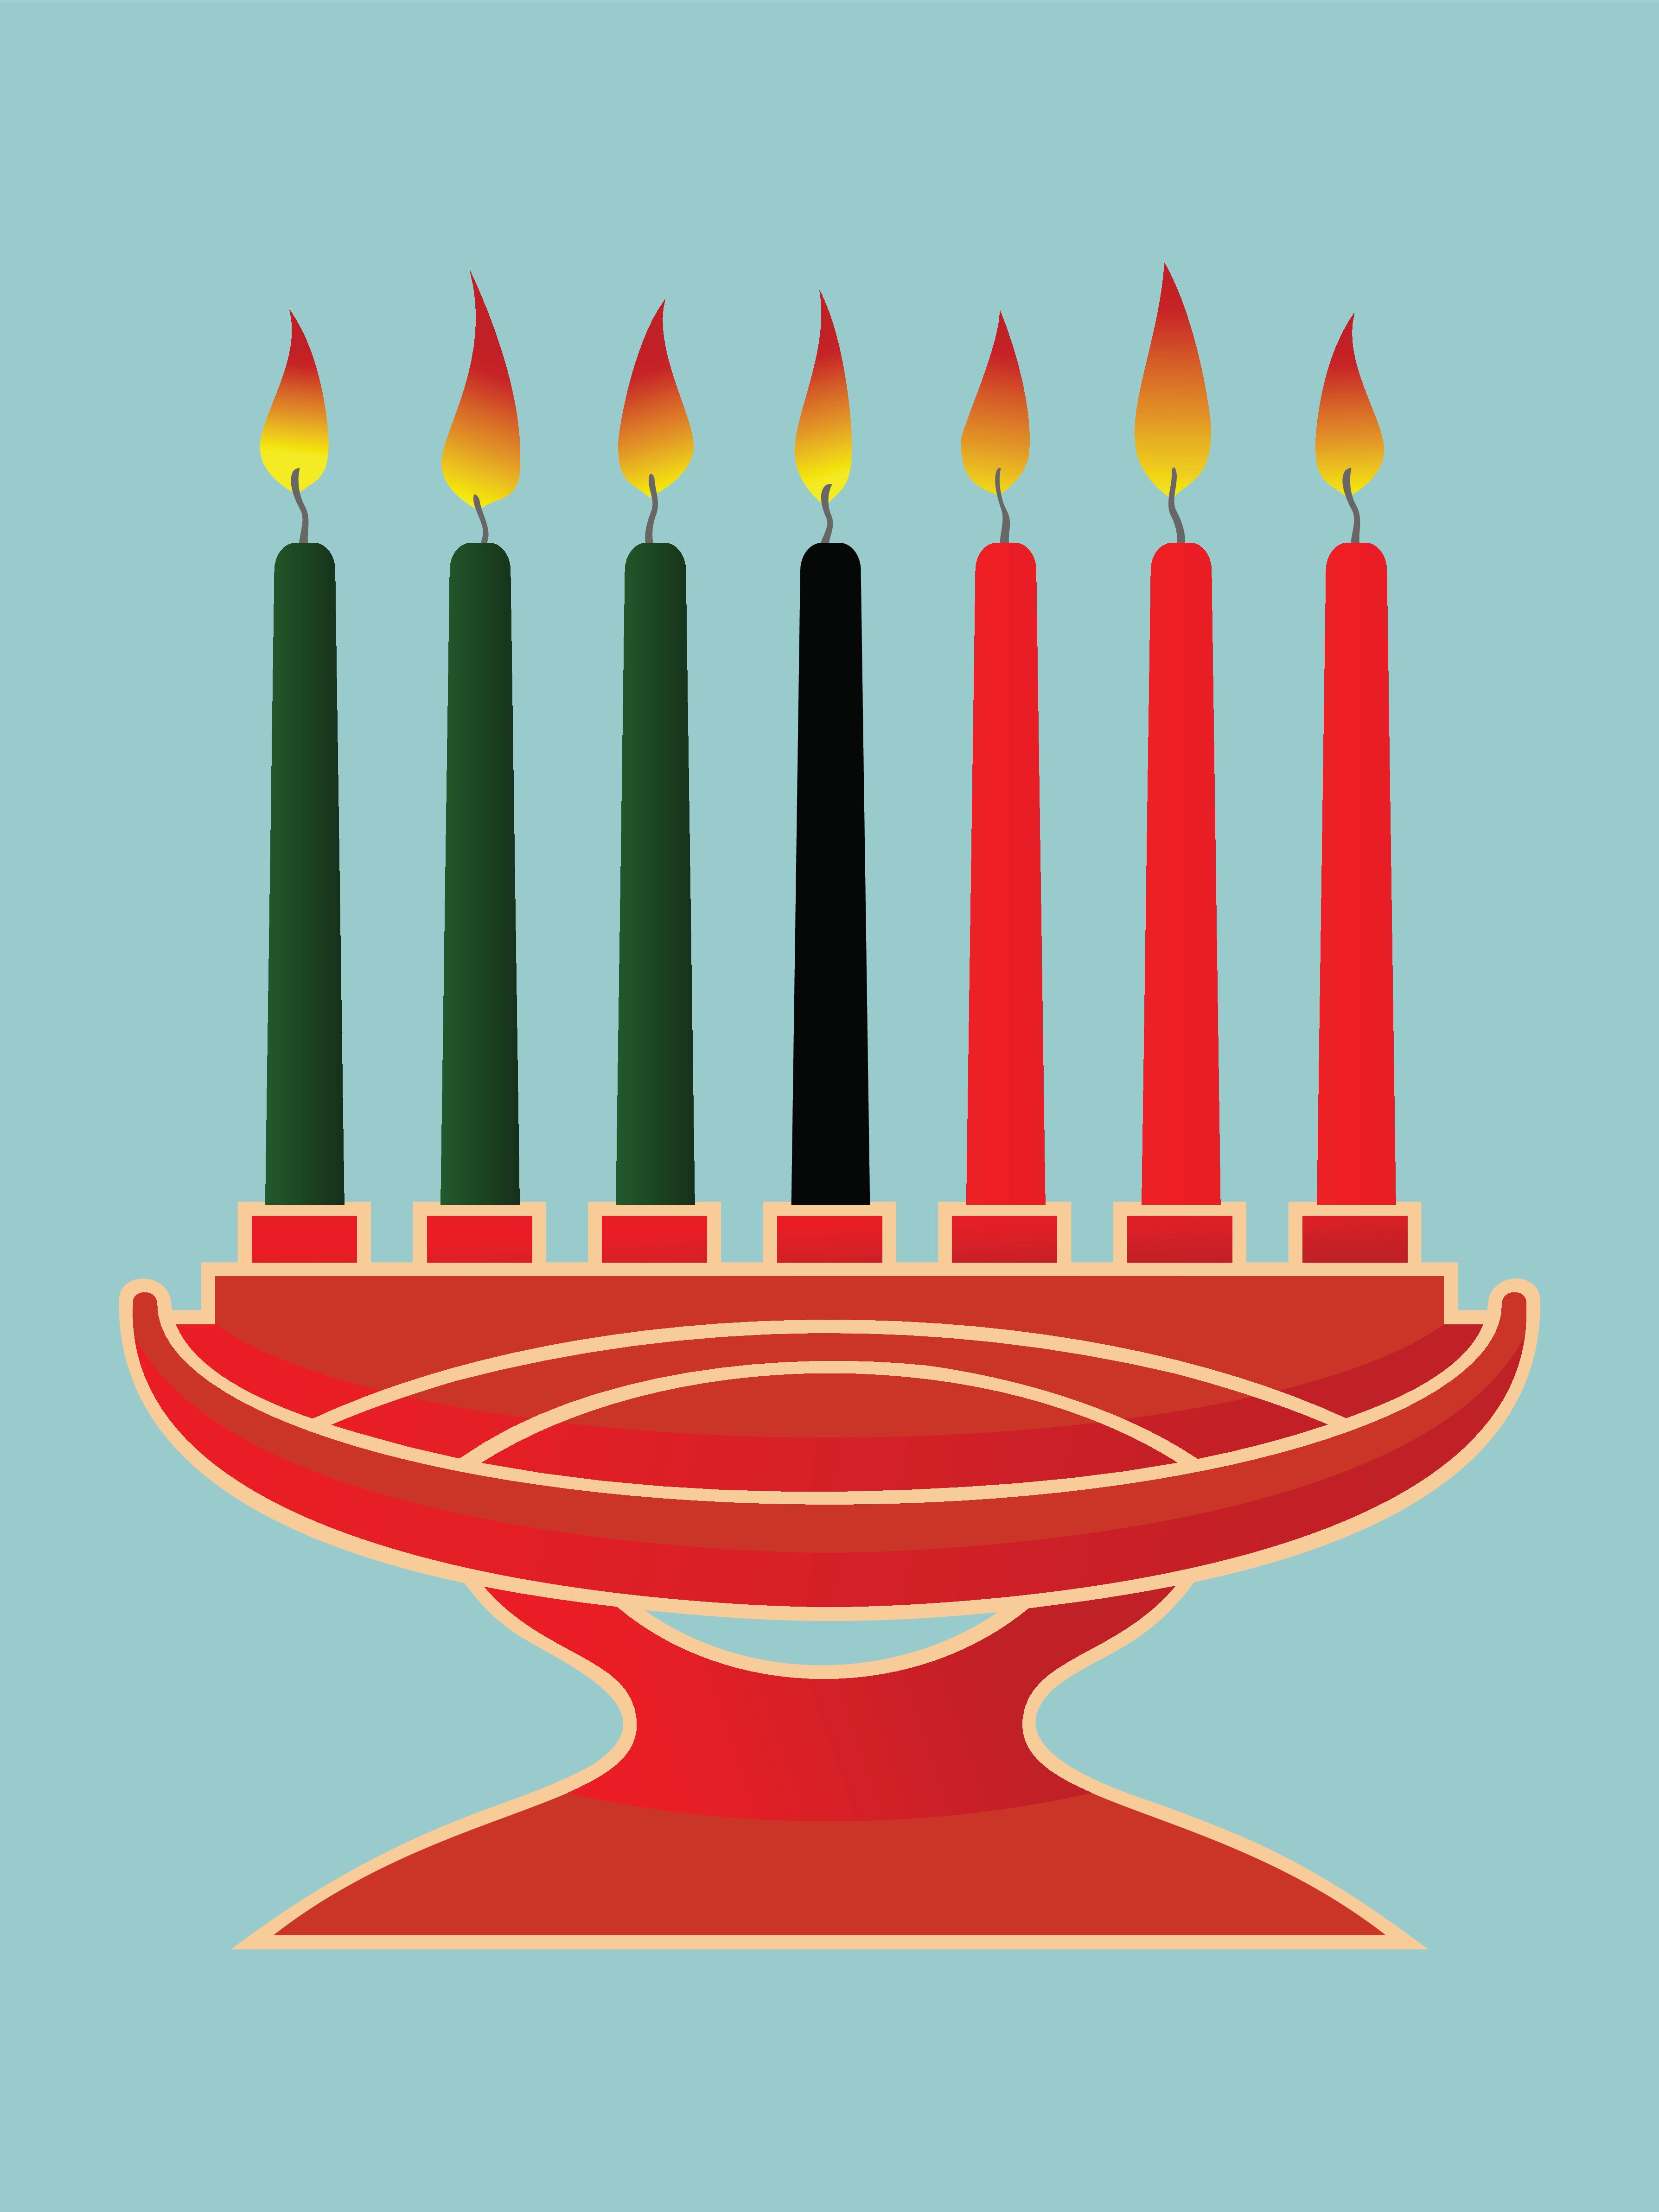 Embracing Kwanzaa: Why It’s More Important Now Than Ever To Celebrate Blackness
